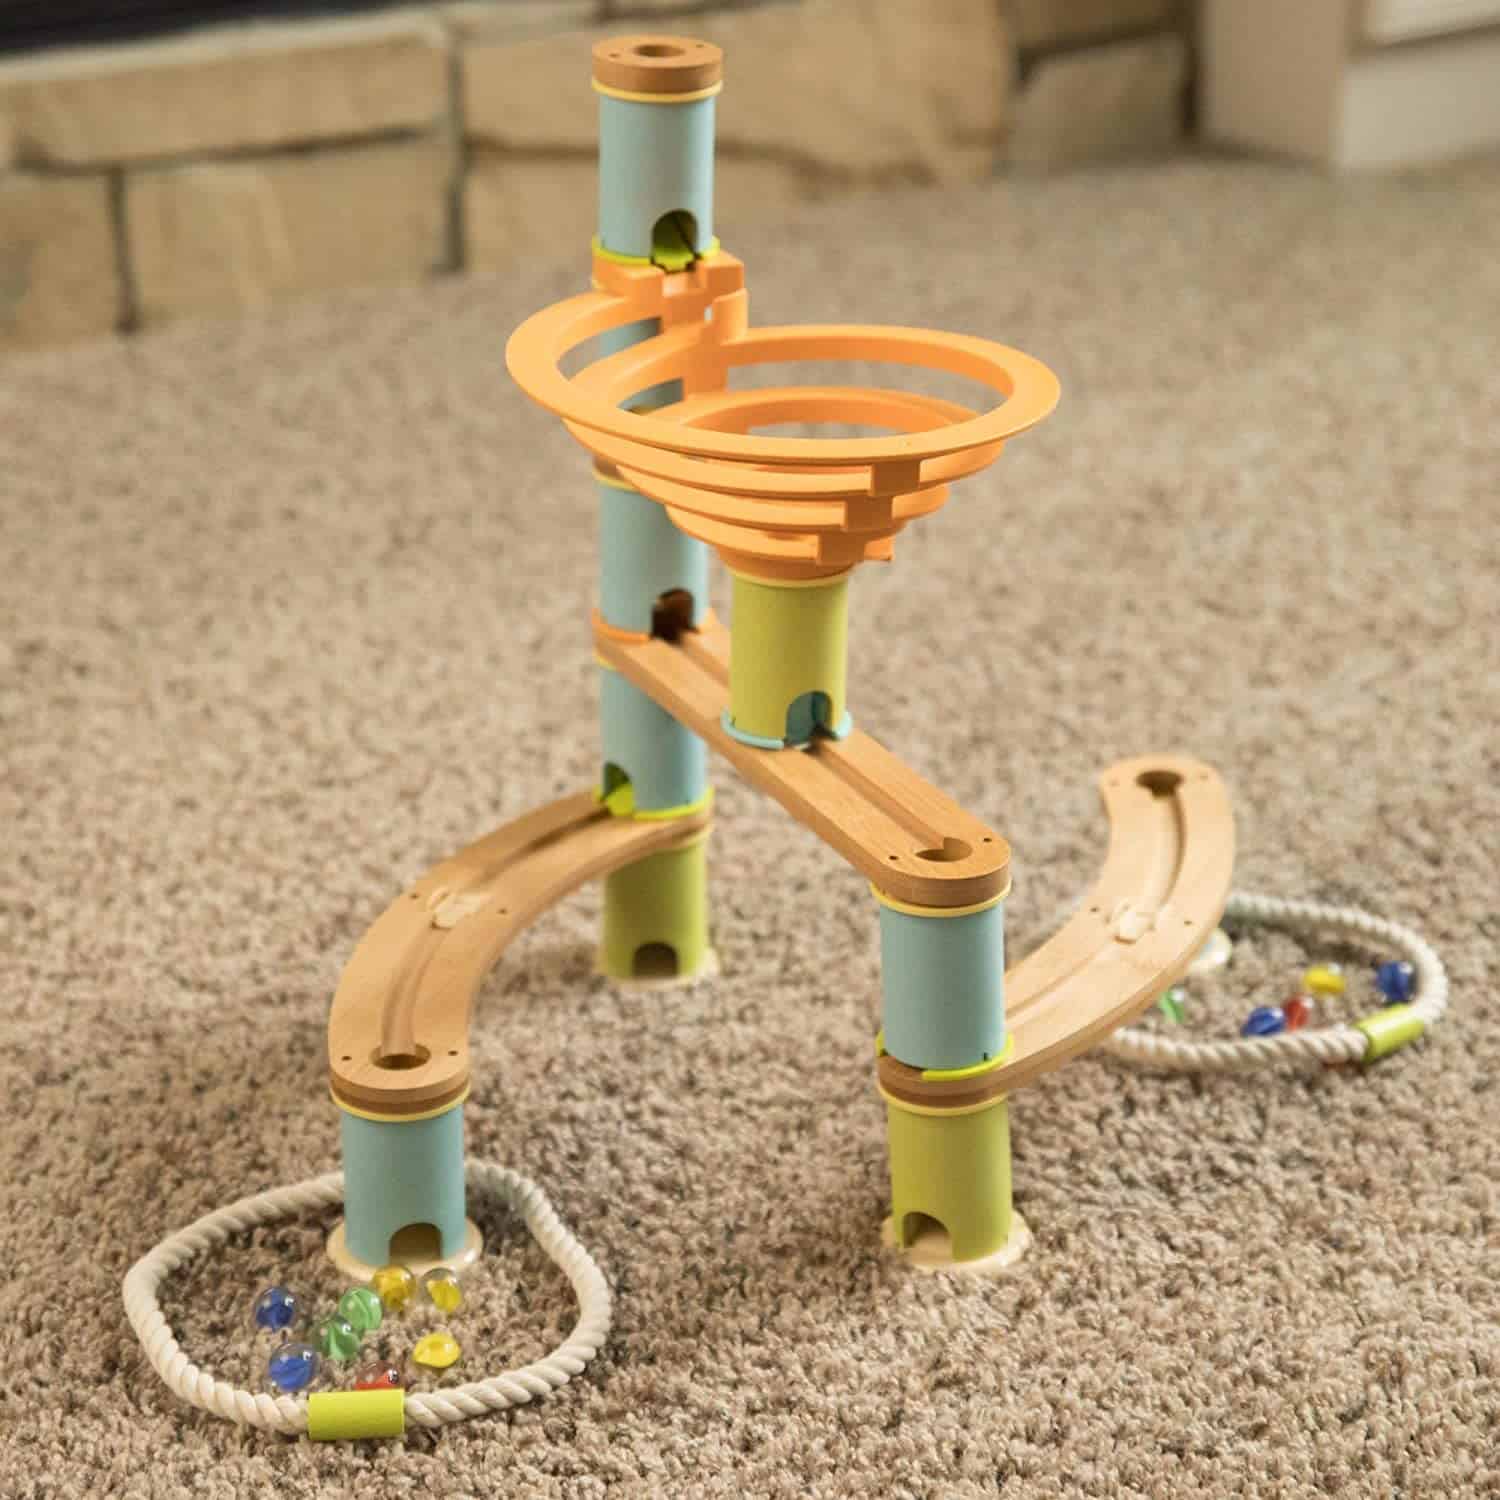 Most sustainable marble track: Fat Brain Toys Bamboo Planet